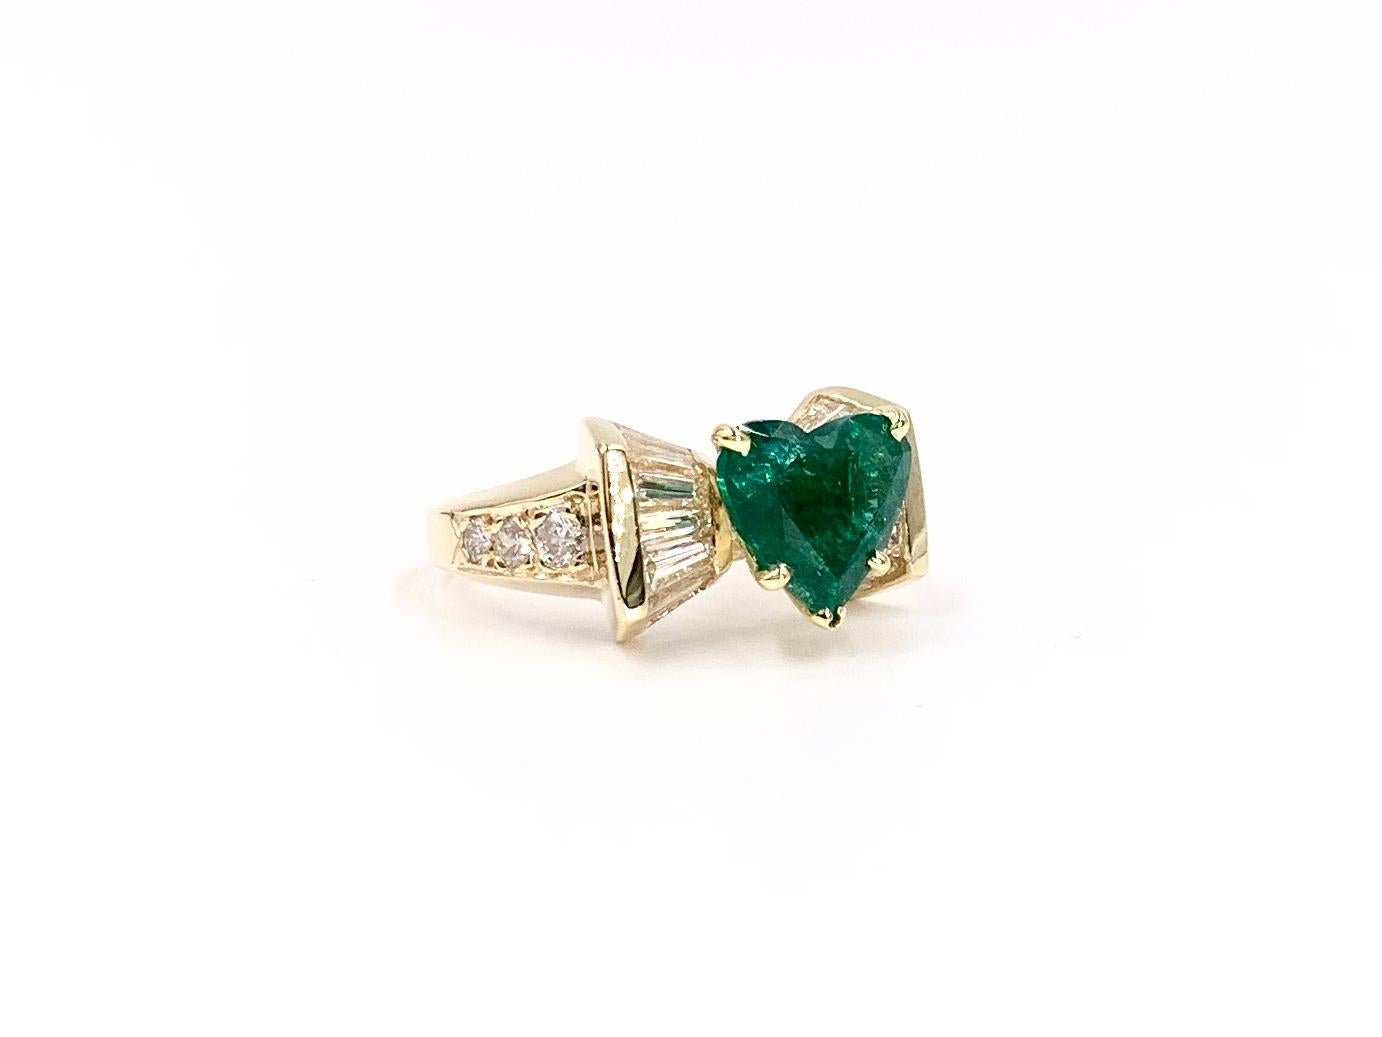 A well saturated, genuine 1.95 carat heart cut emerald is showcased in this polished 18 karat yellow gold baguette and round brilliant diamond setting. Diamond carat total weight is 1.26 carats at approximately H color, VS2 clarity.
Width of ring